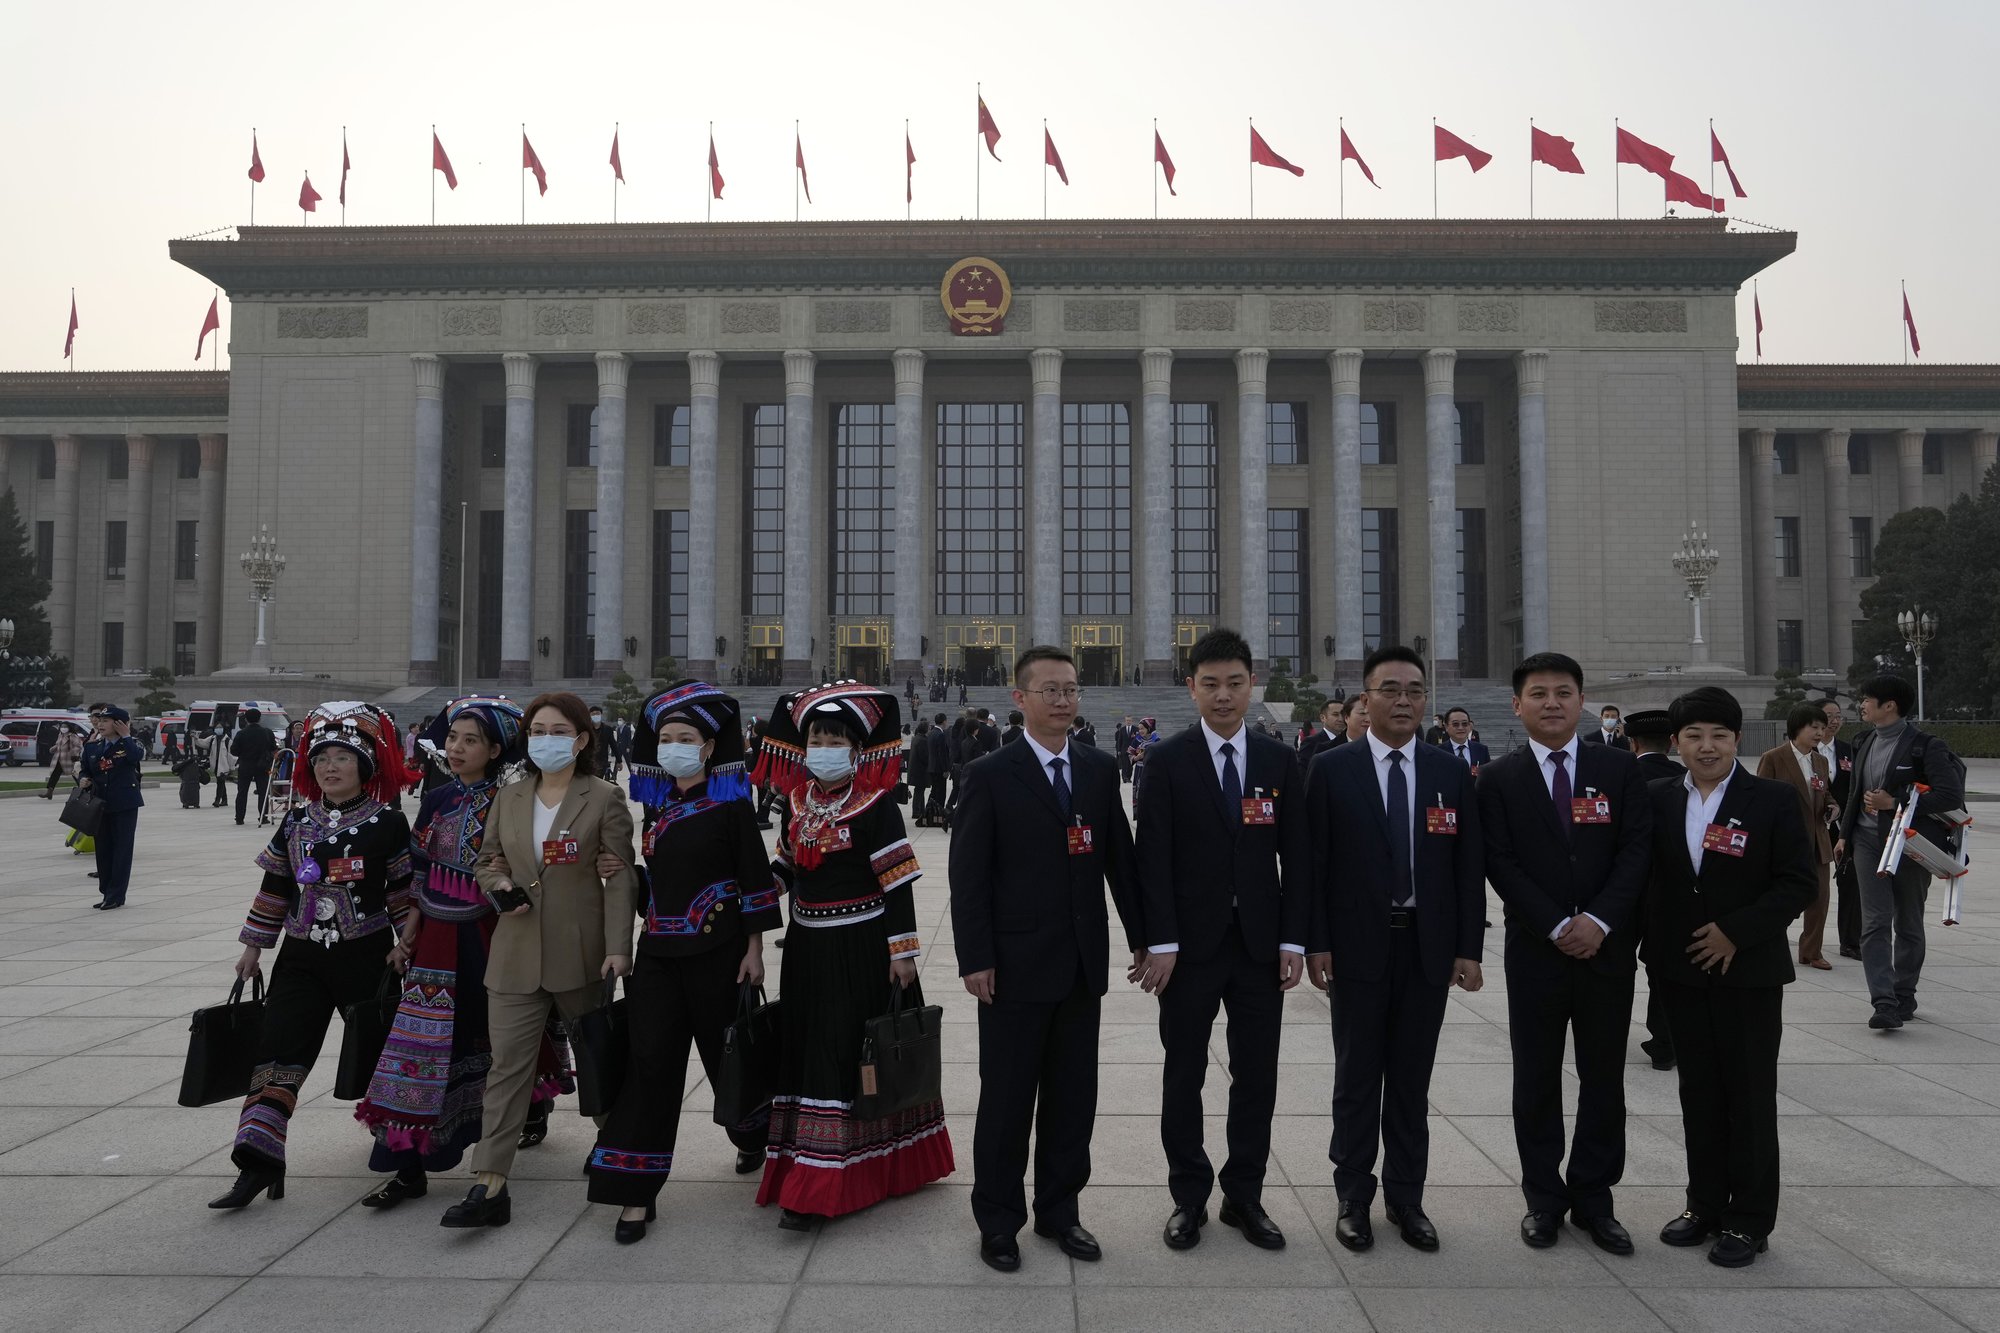 Delegates pose for a group photo after a session of China's National People's Congress (NPC) at the Great Hall of the People in Beijing, Tuesday, March 7, 2023. (AP Photo/Ng Han Guan)